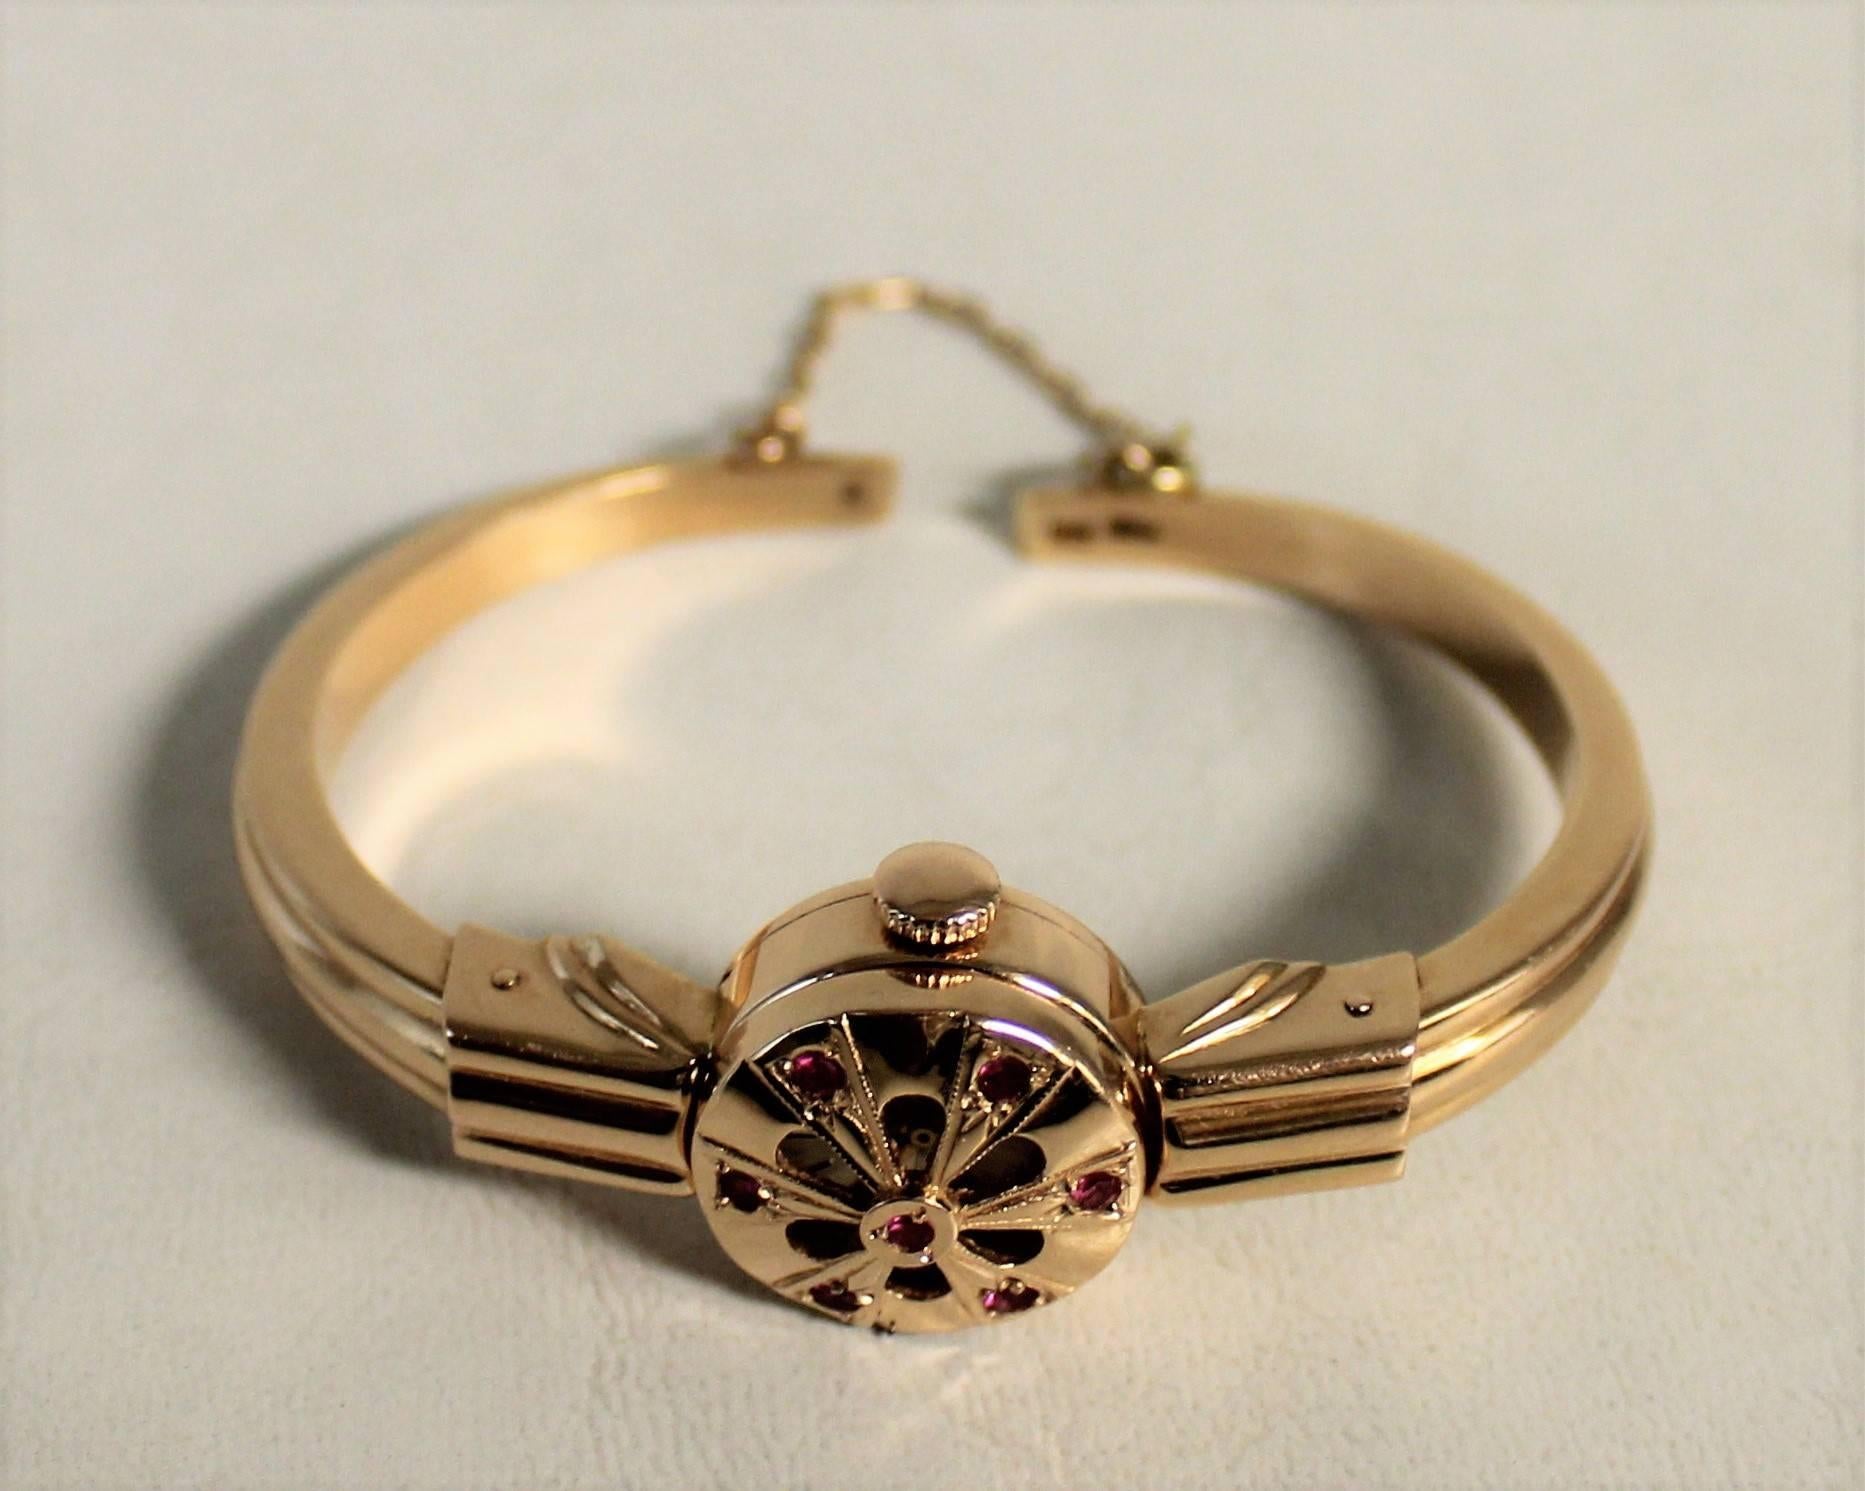 14-carat gold Russian Haupu ladies watch with rubies and hinged cover. Weight: 20.7 grams.